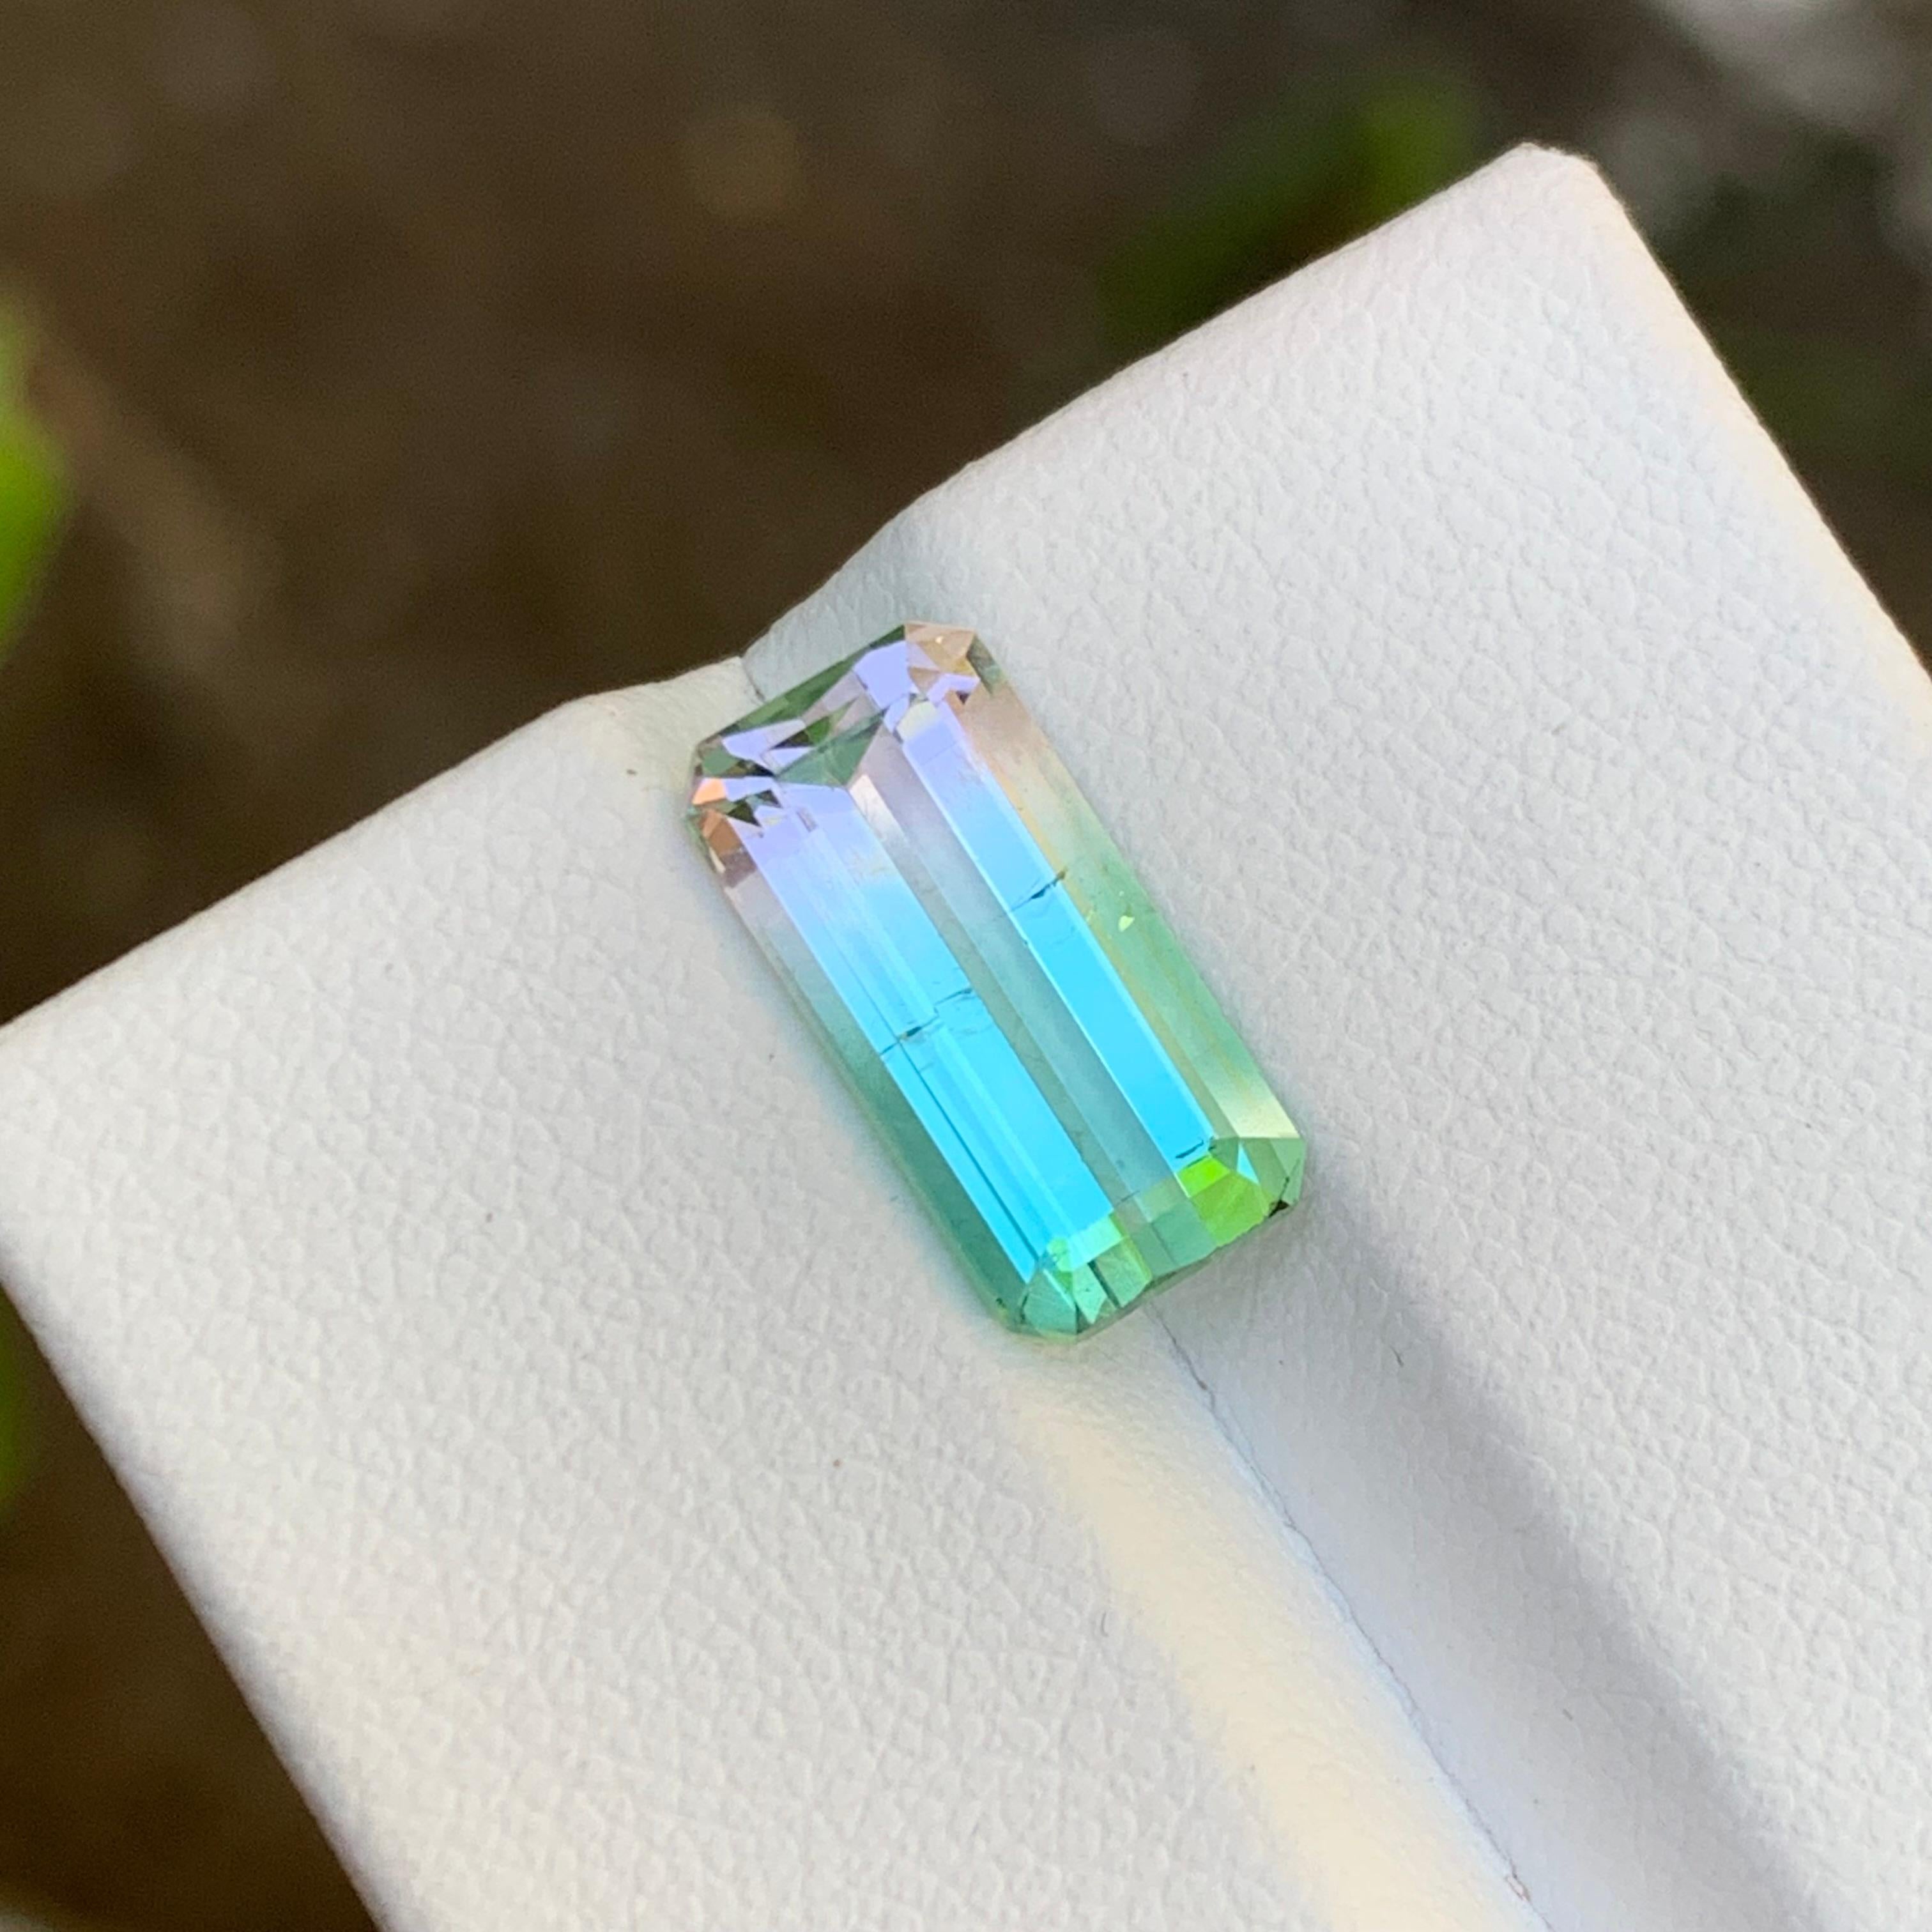 Contemporary Rare Neon Bluish Green and Pink Bicolor Tourmaline Gemstone, 3.95 Ct Emerald Cut For Sale